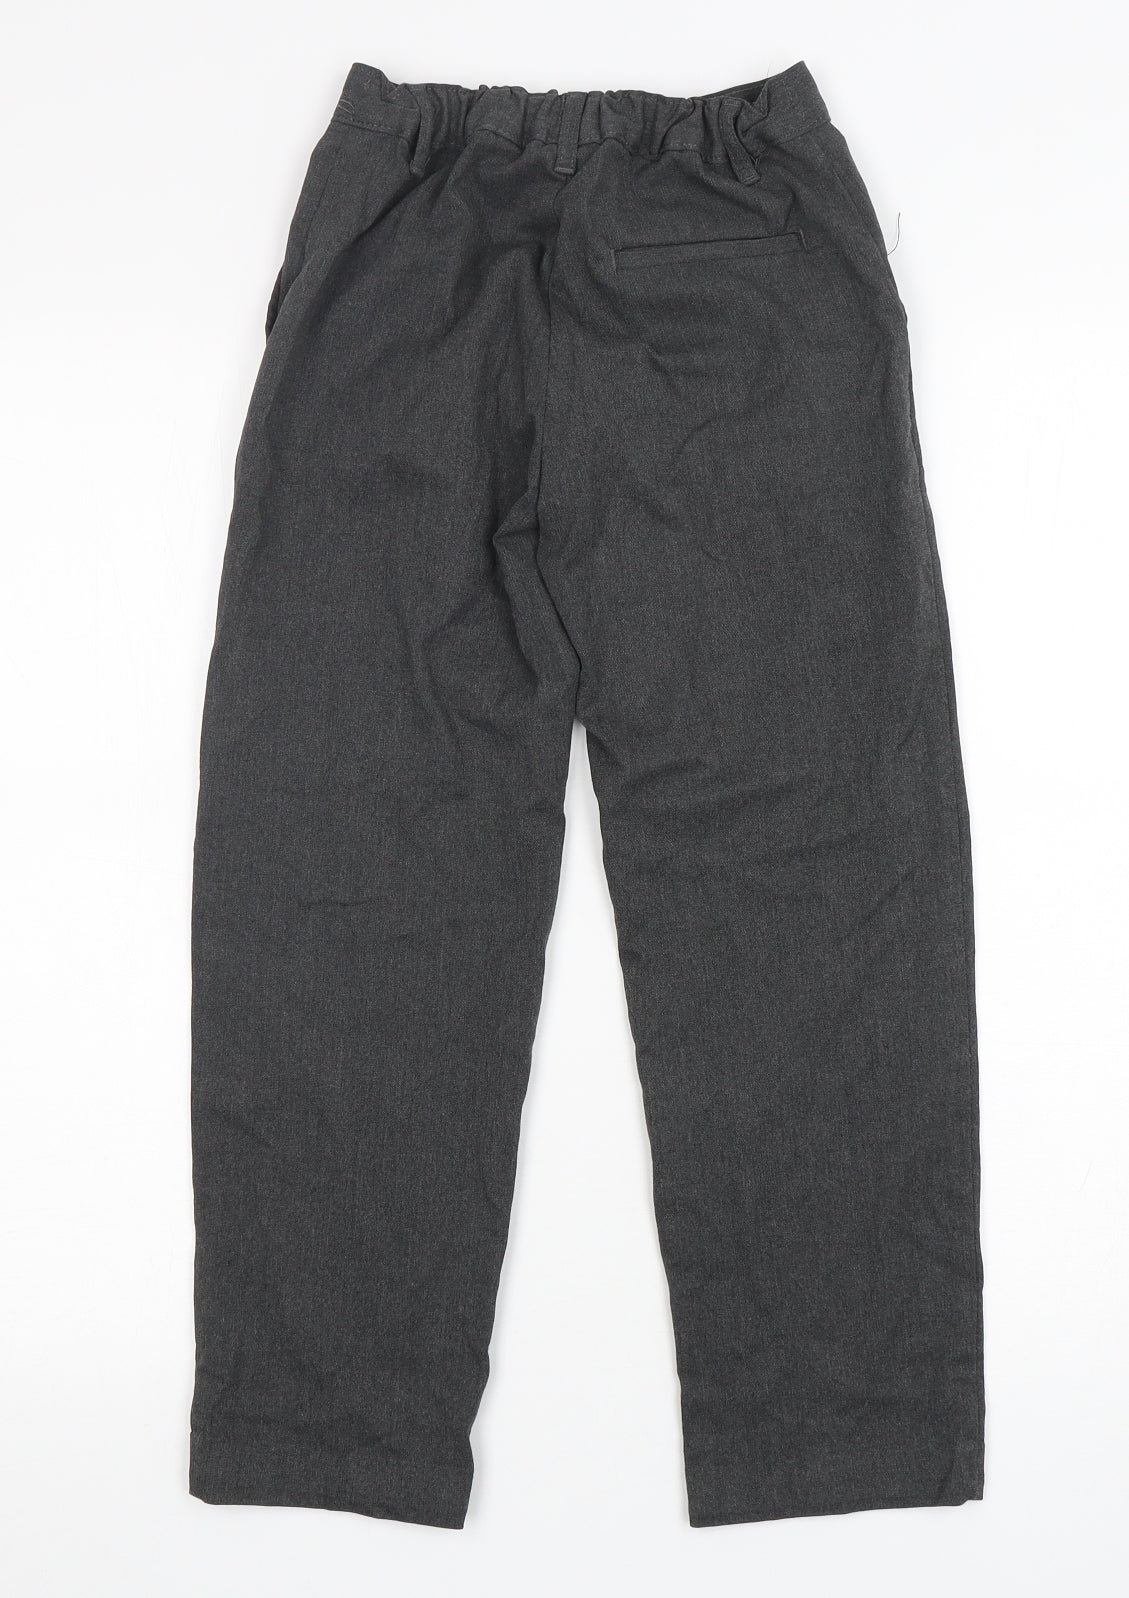 Dunnes Stores Boys Grey  Polyester Dress Pants Trousers Size 8-9 Years  Regular